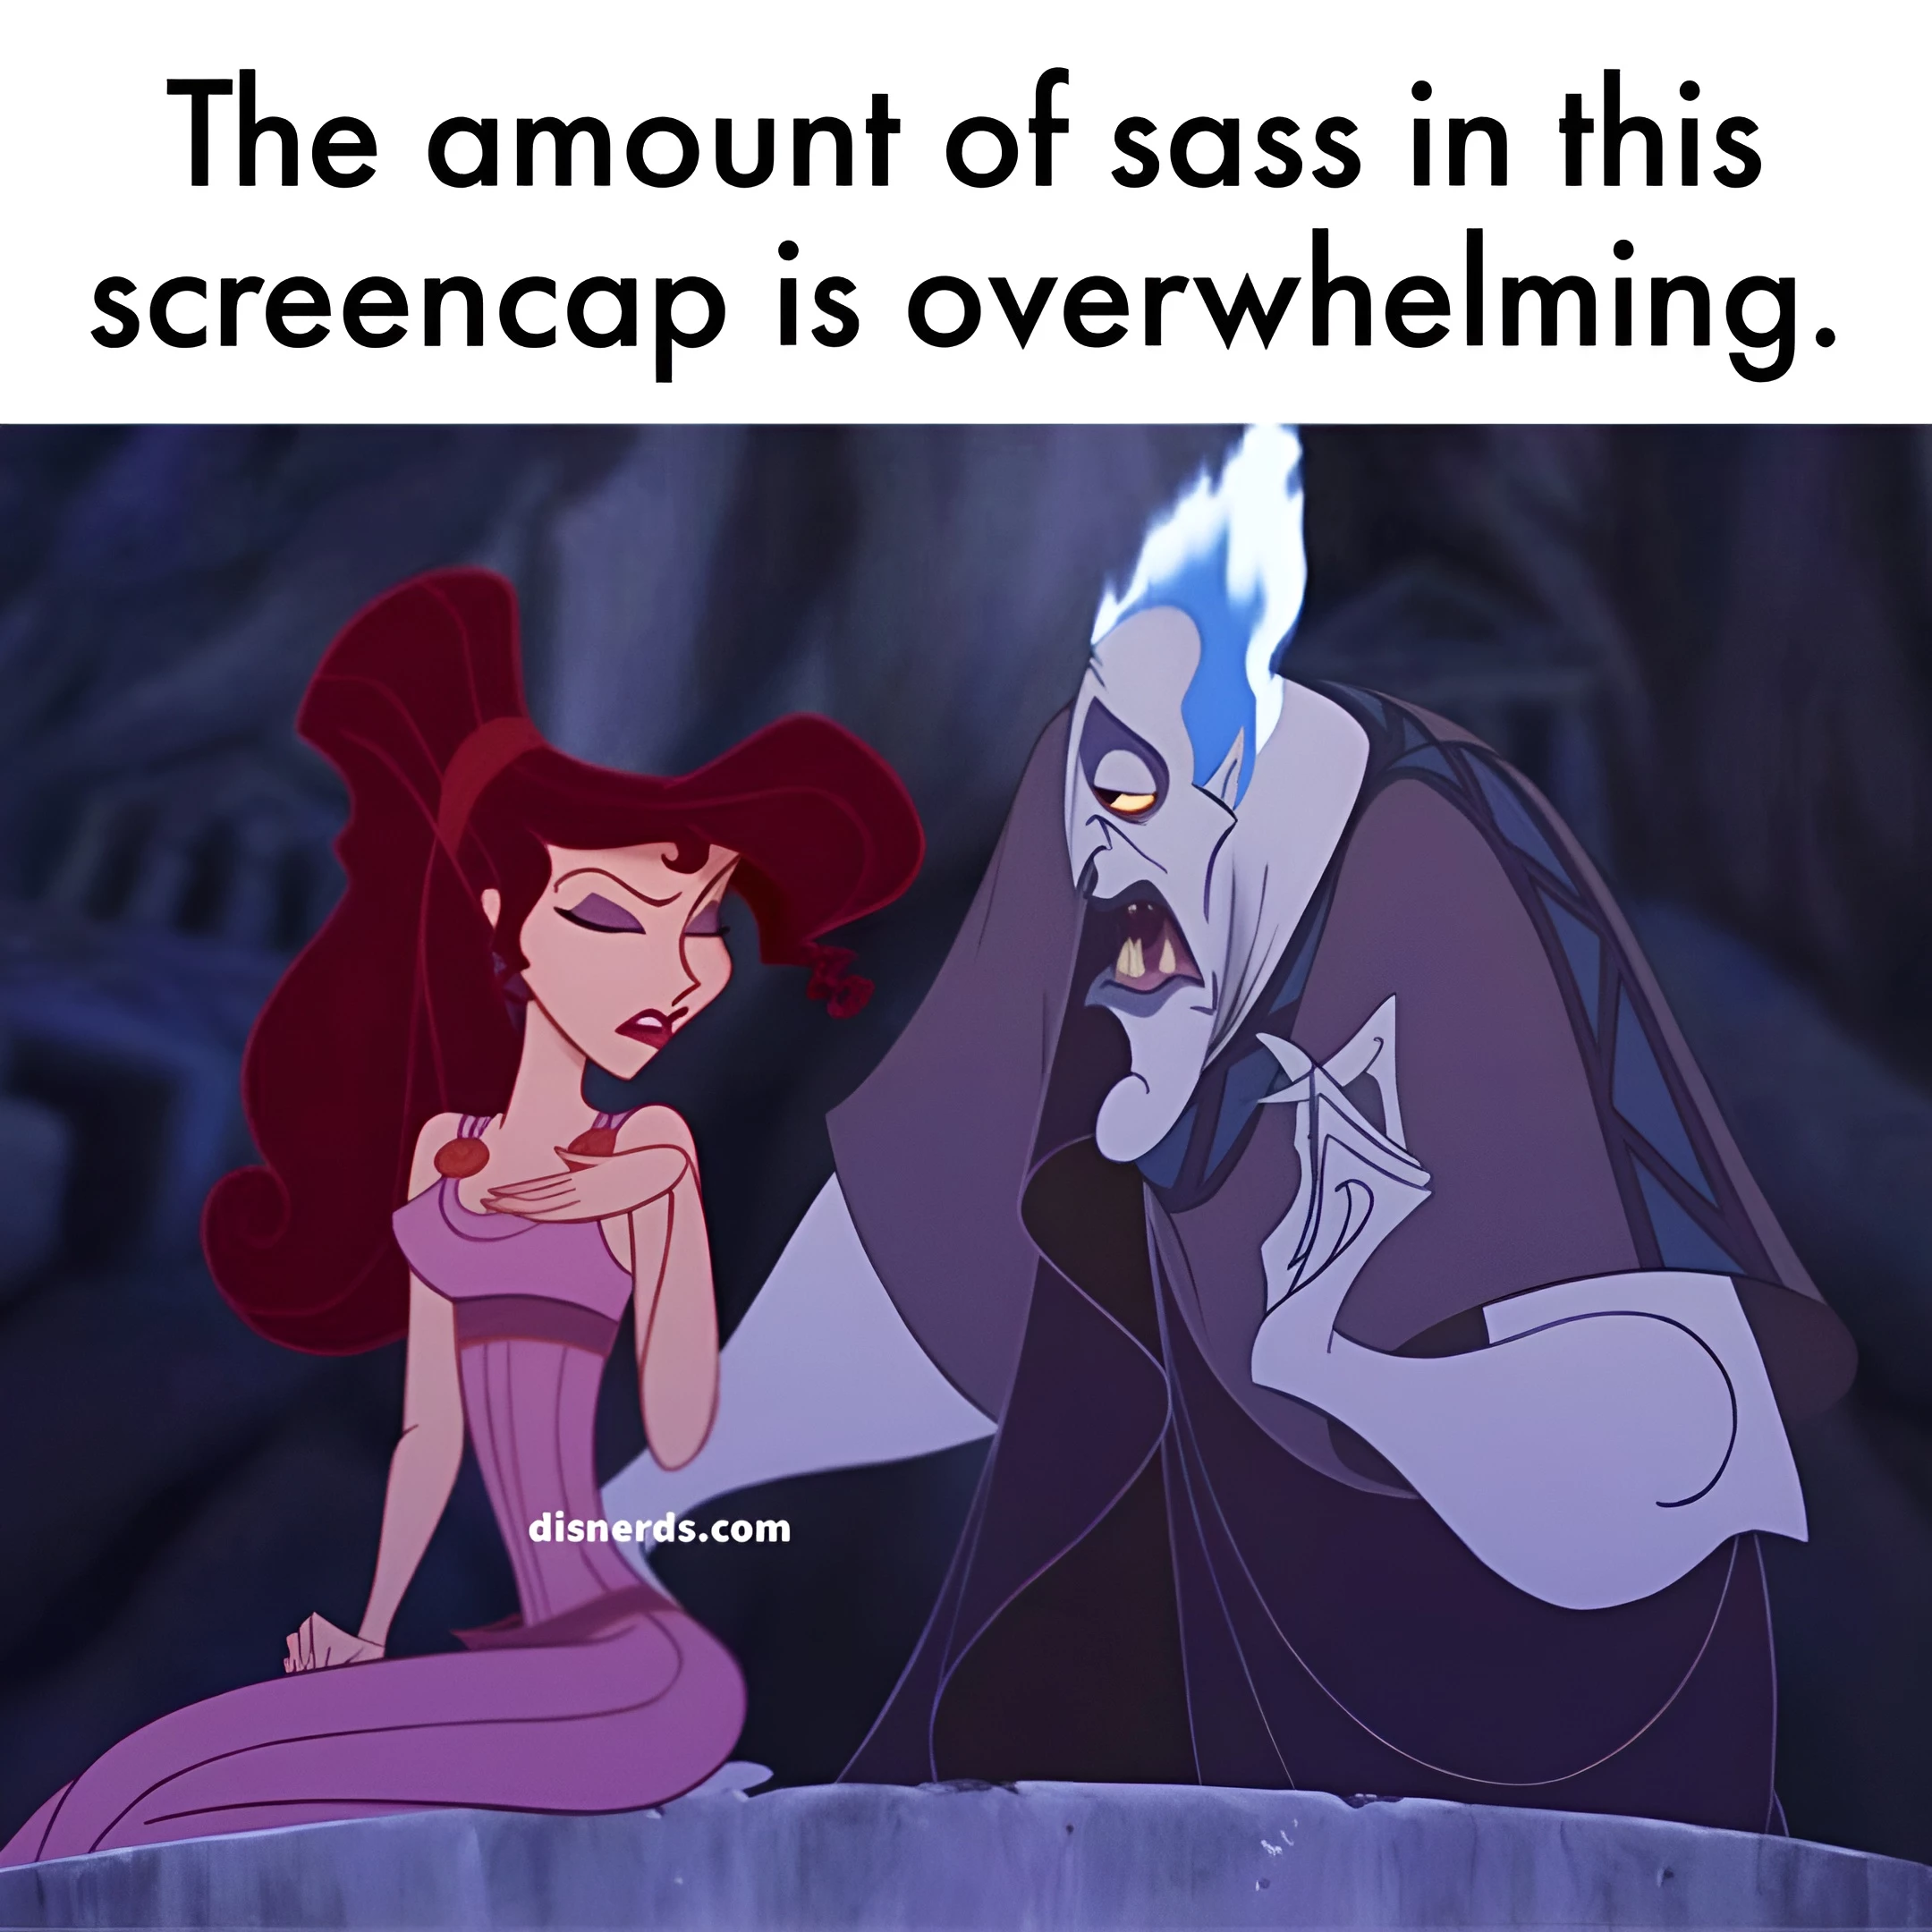 Hades, The God Of The Underworld? More Like The God Of Sass